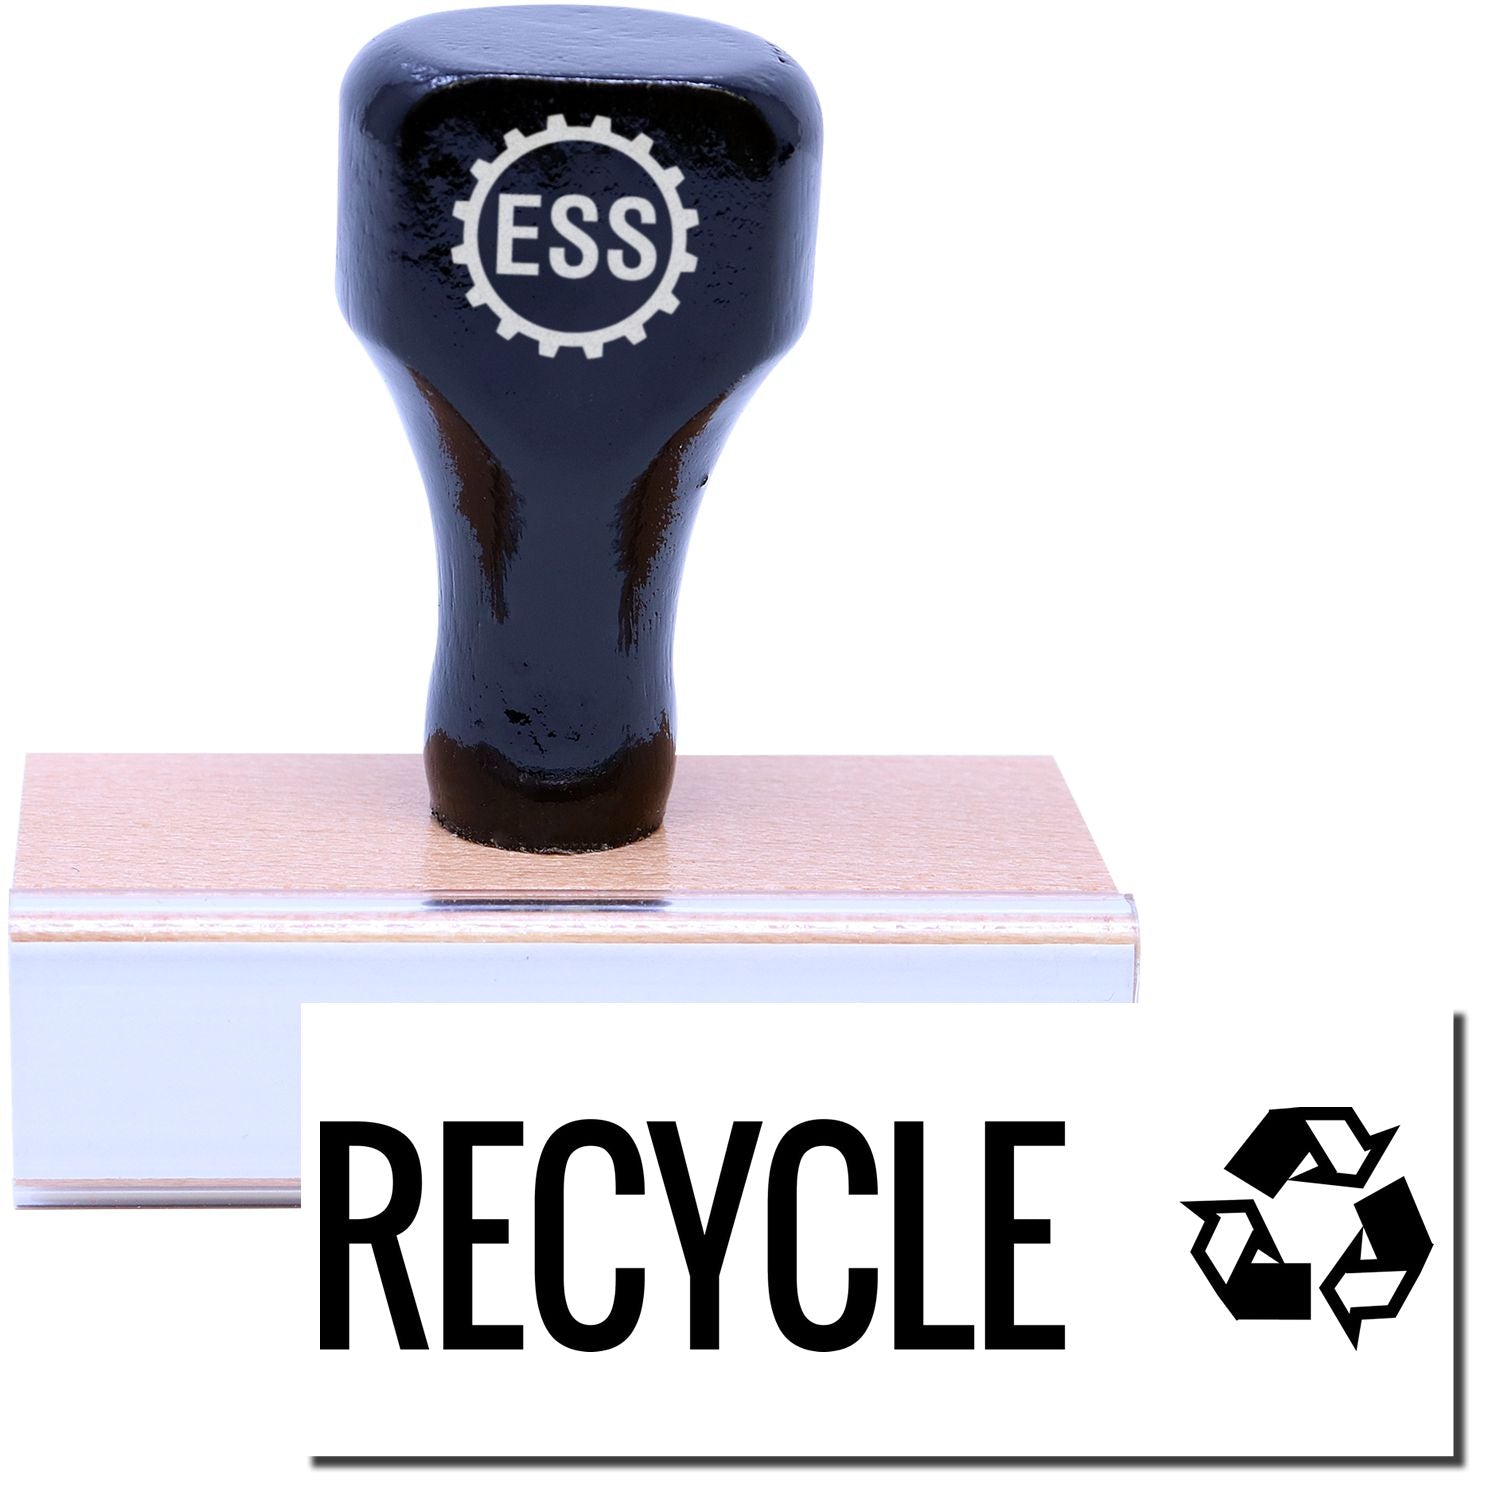 A stock office rubber stamp with a stamped image showing how the text "RECYCLE" in a large font with the recycling icon on the right side is displayed after stamping.